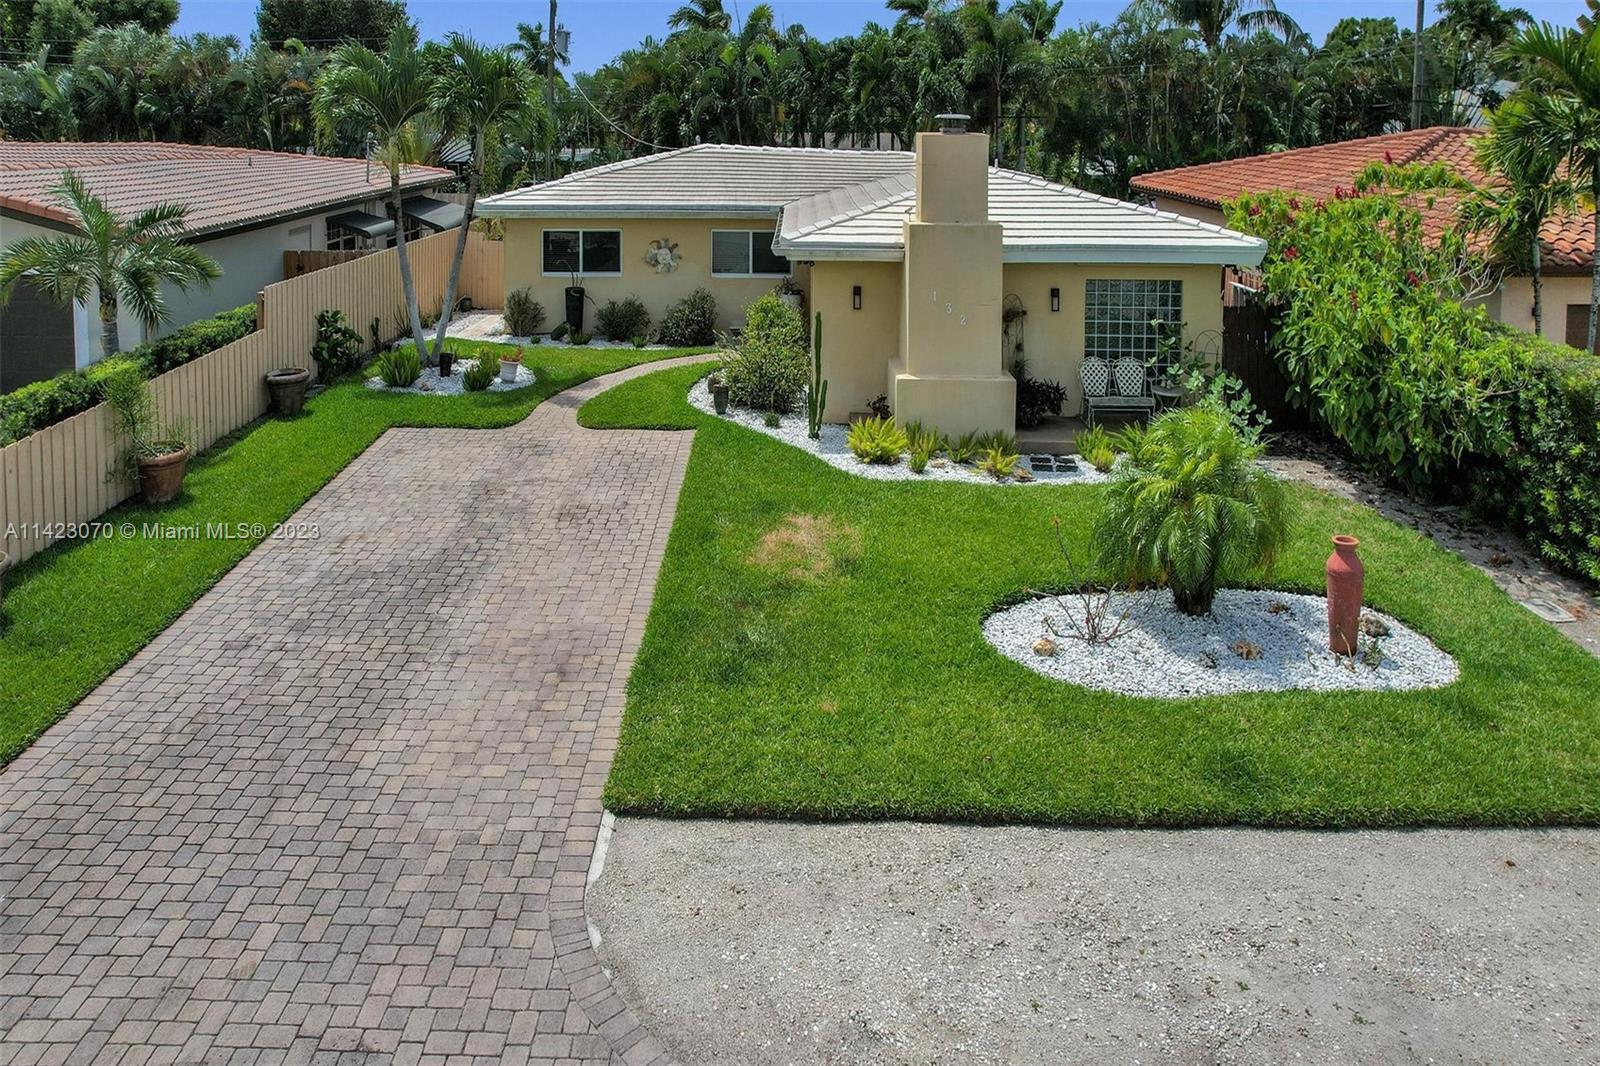 Only 3 miles away from the world famous beaches of Fort Lauderdale. Beautifully upgraded pool home w